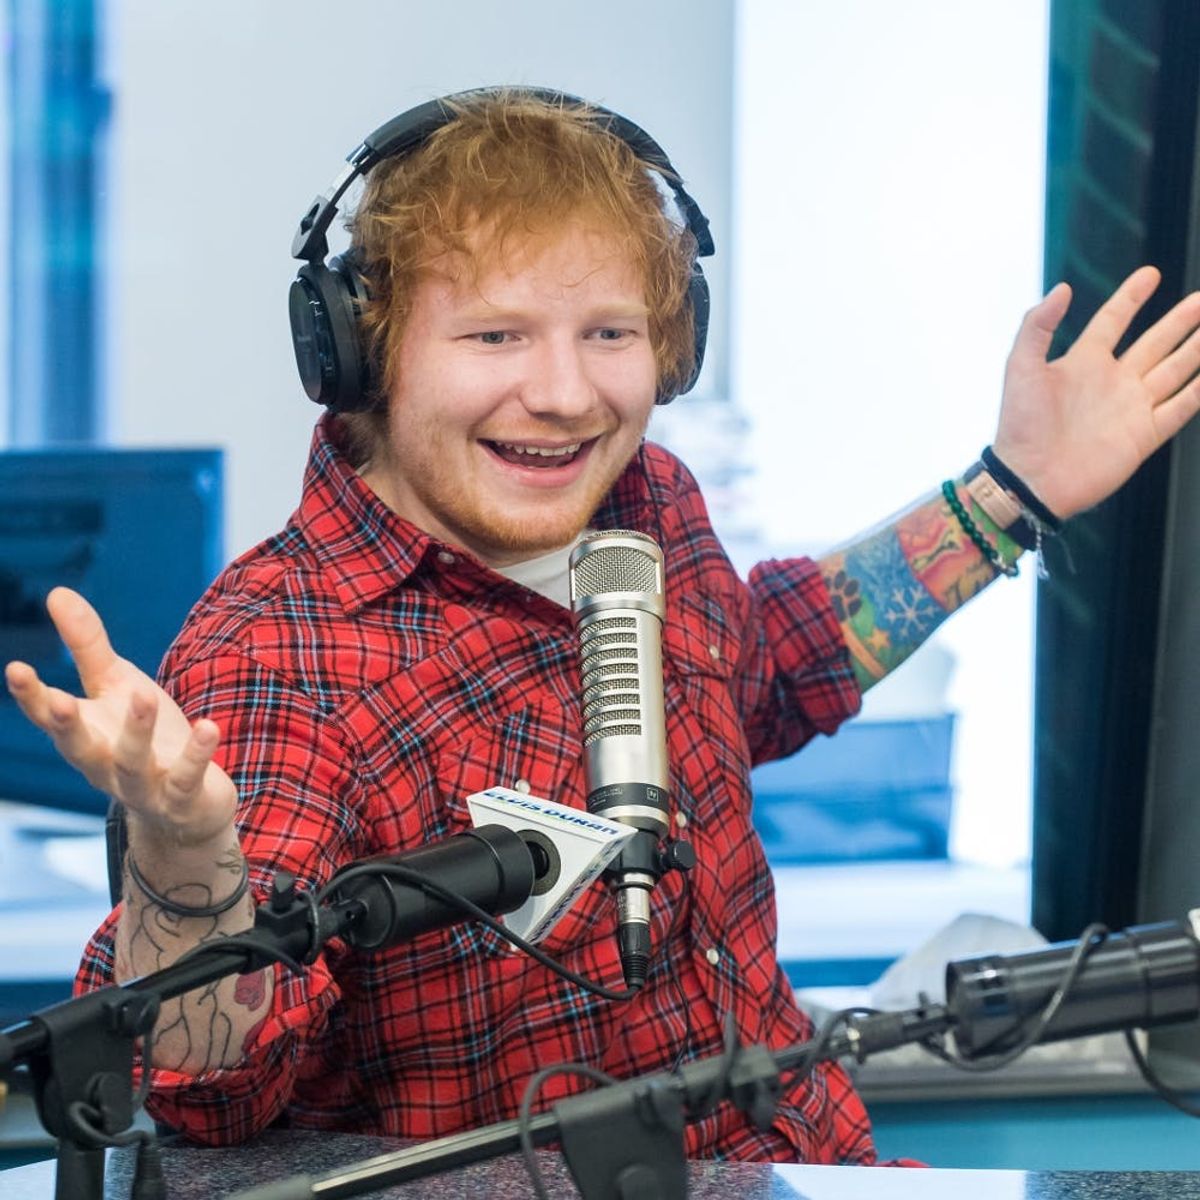 WTF: Ed Sheeran Hit Justin Bieber in the Face With a Golf Club